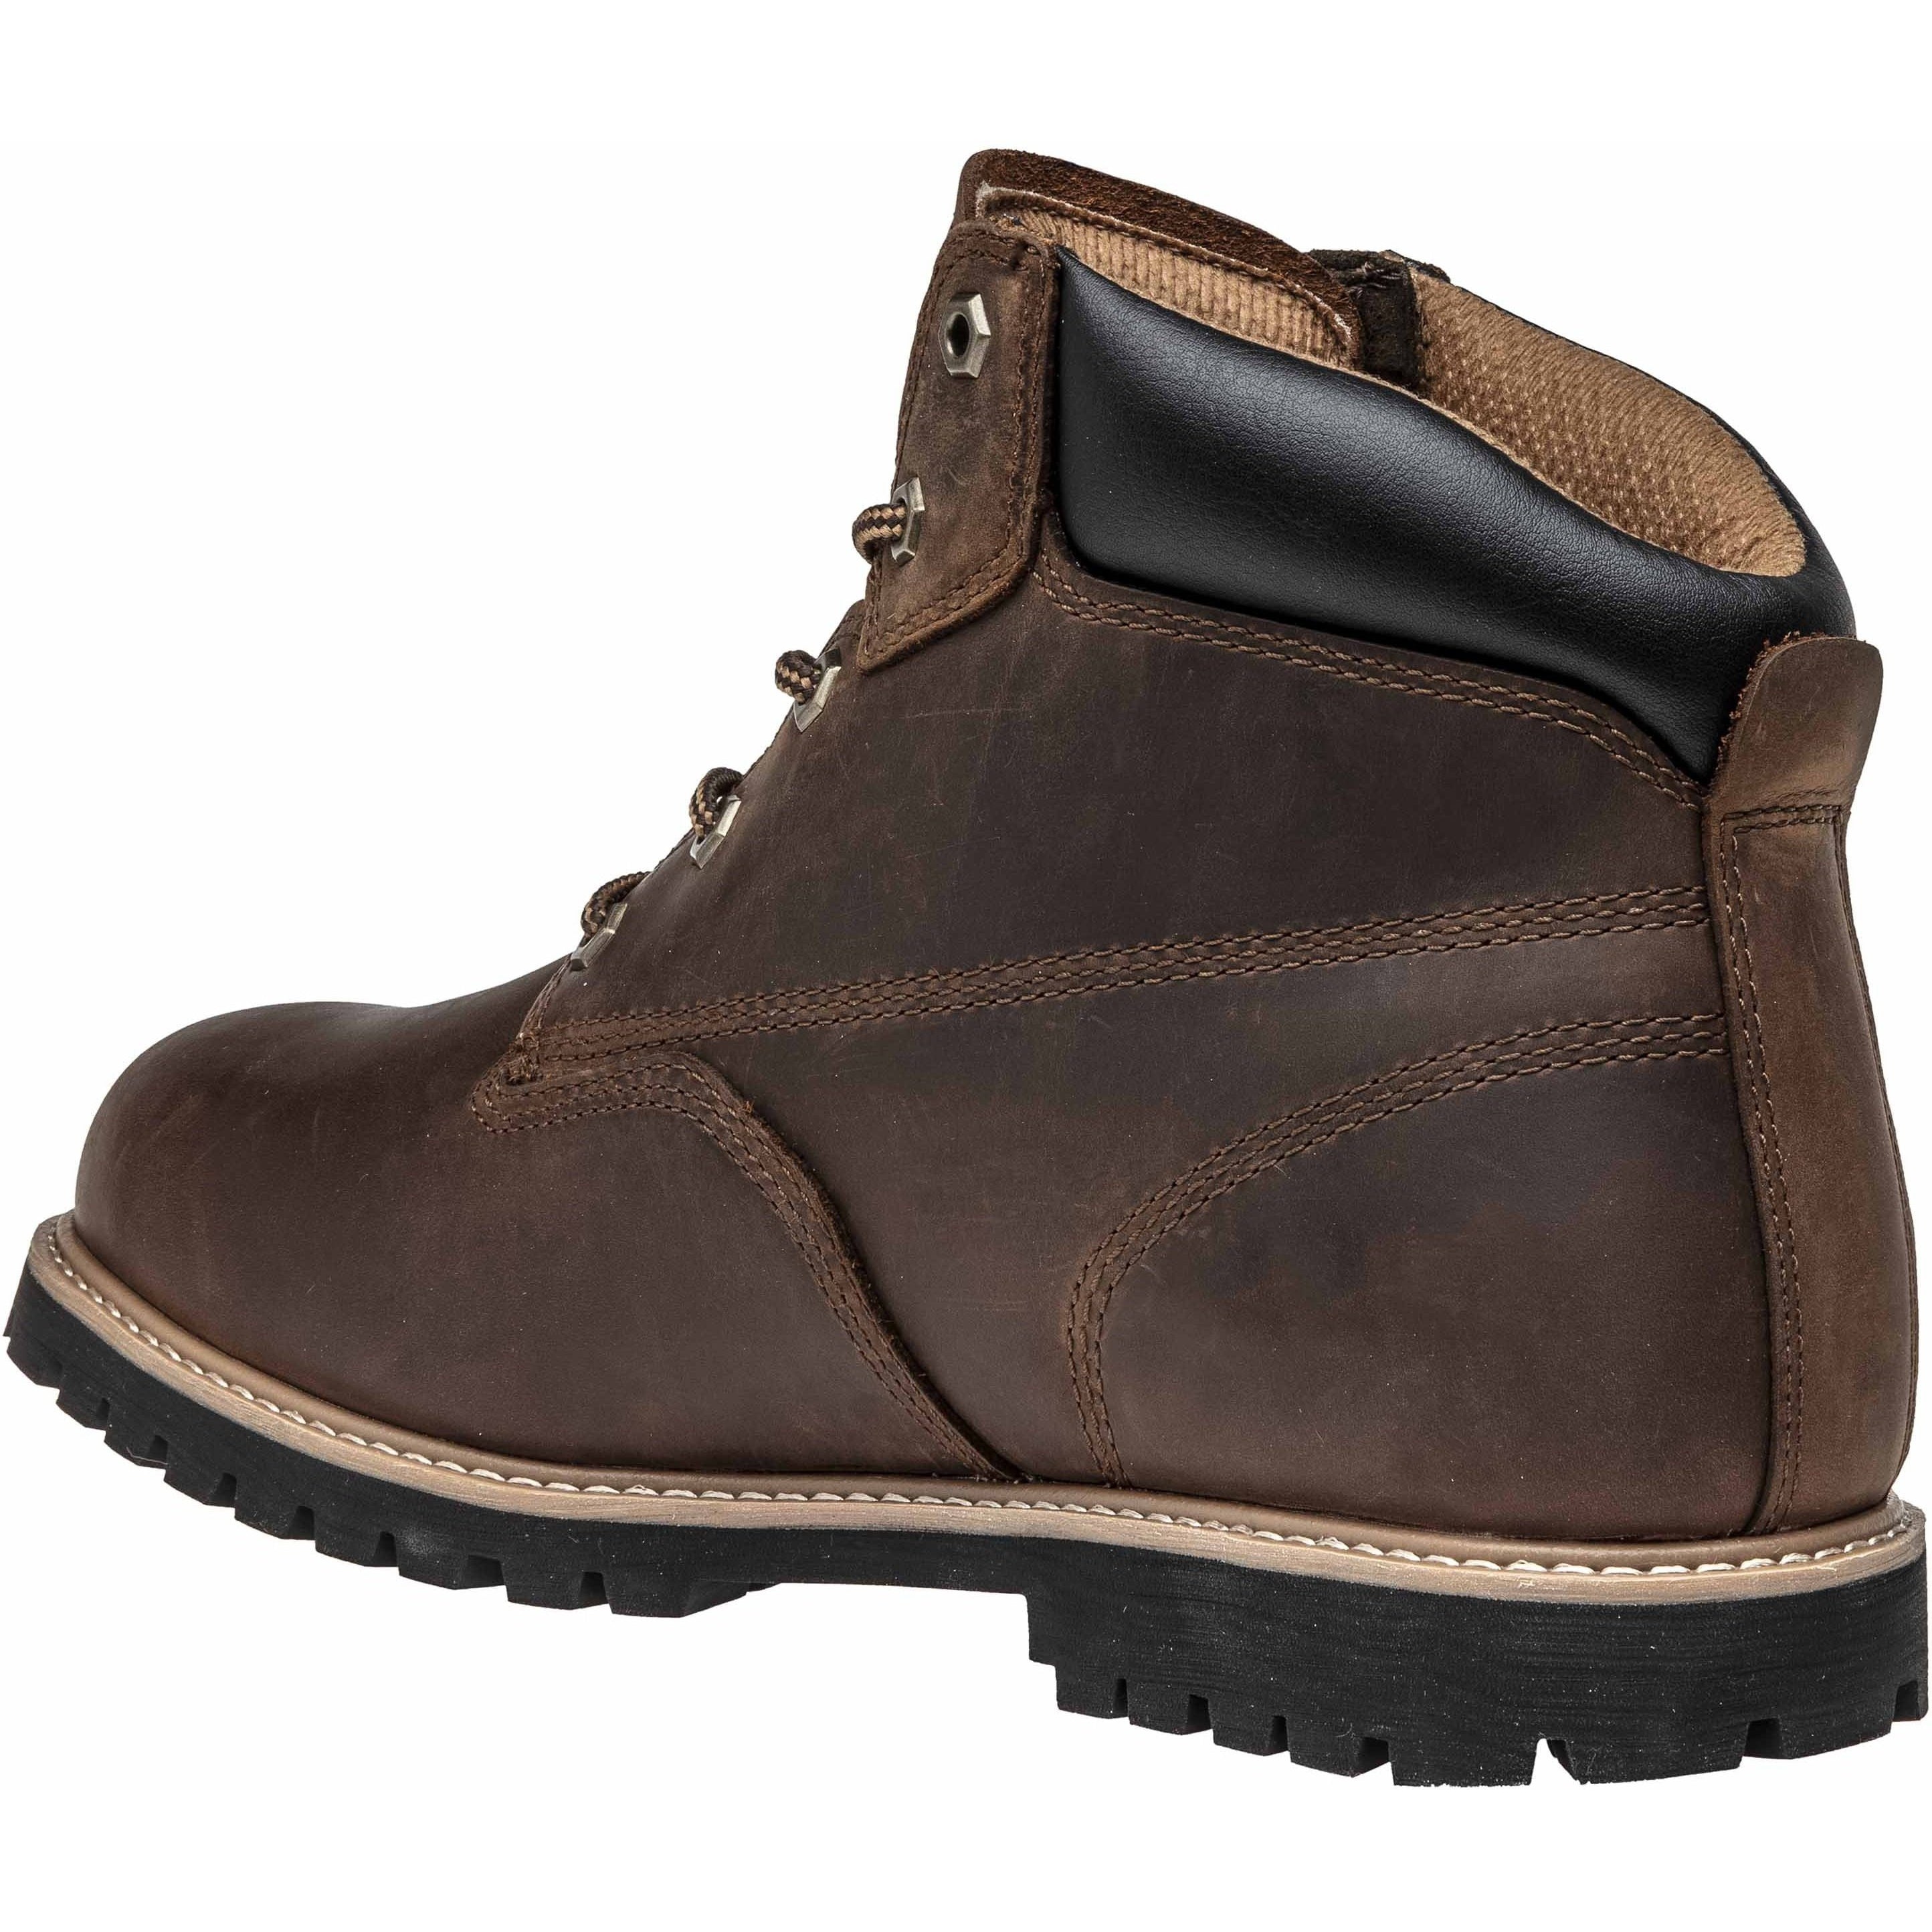 Timberland PRO Men's Gritsone 6" Work Boot - Brown - TB0A1WG2214  - Overlook Boots